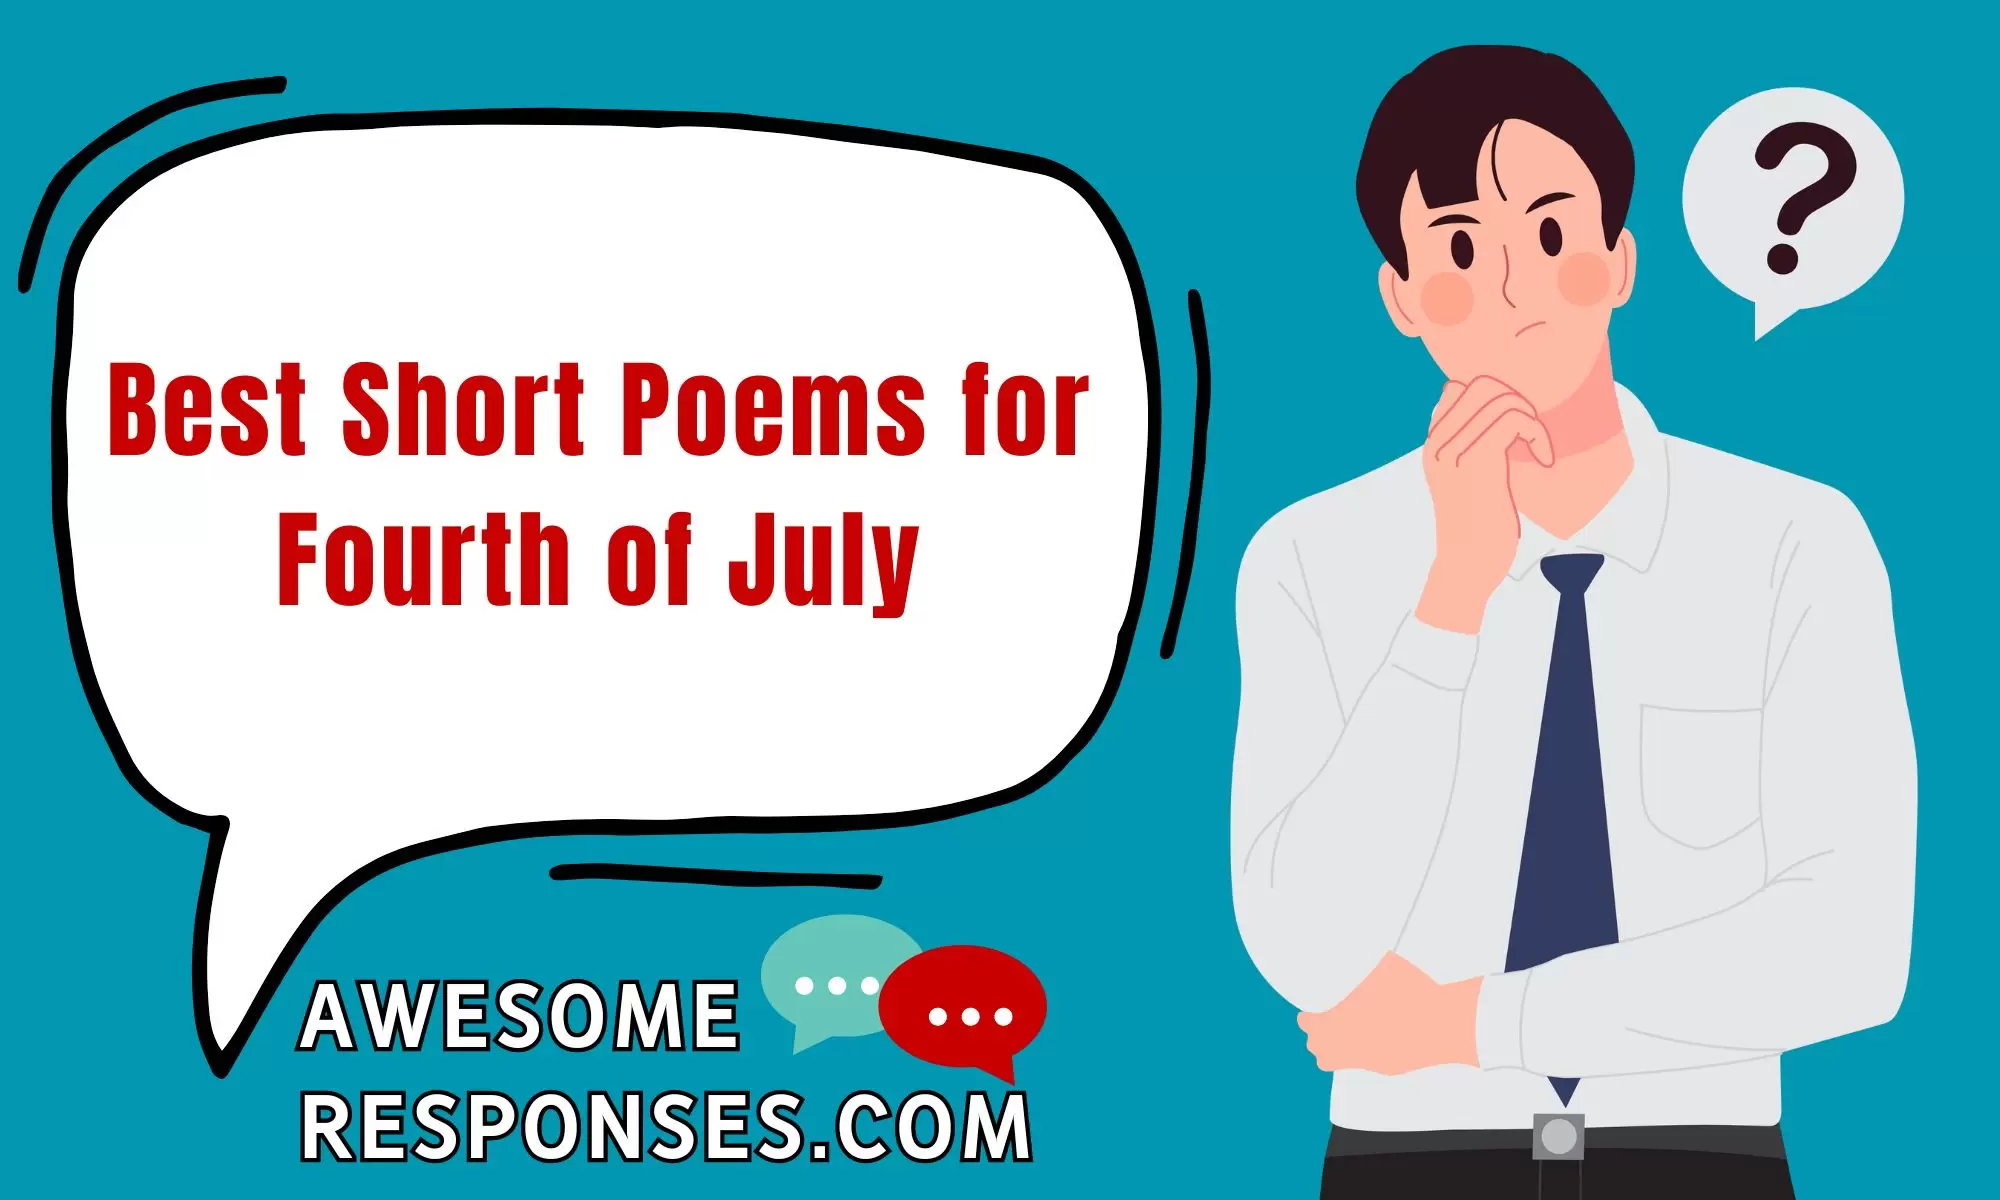 Best Short Poems for Fourth of July